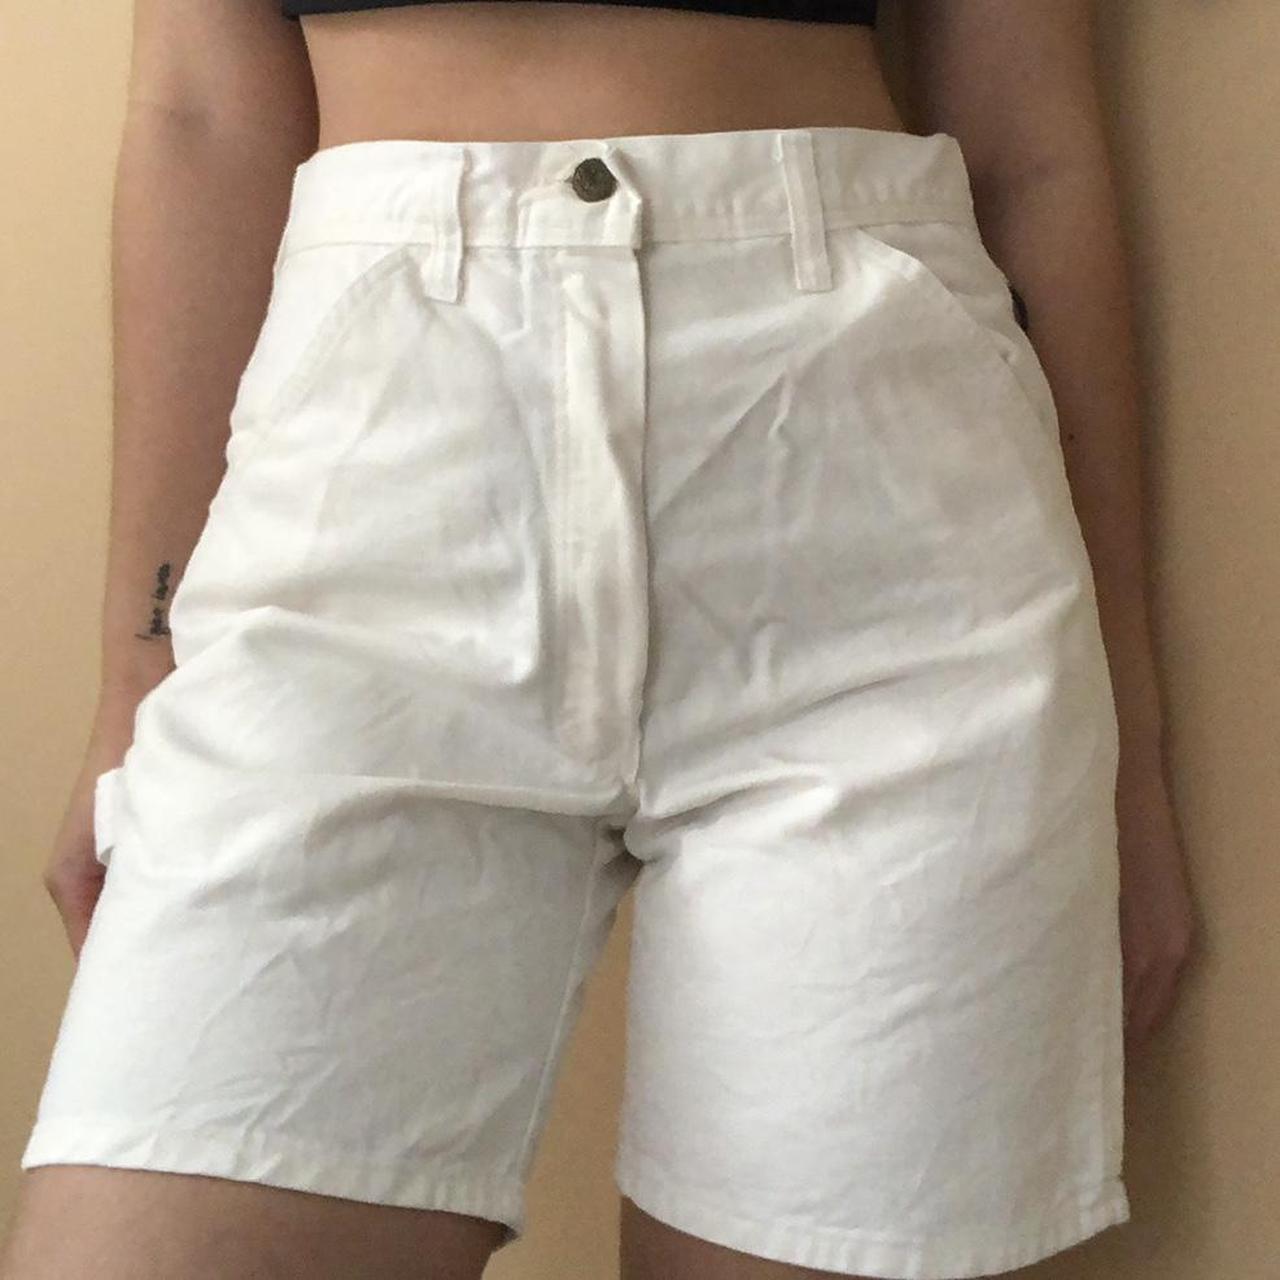 Product Image 2 - Vintage Stan Ray White Shorts

29”